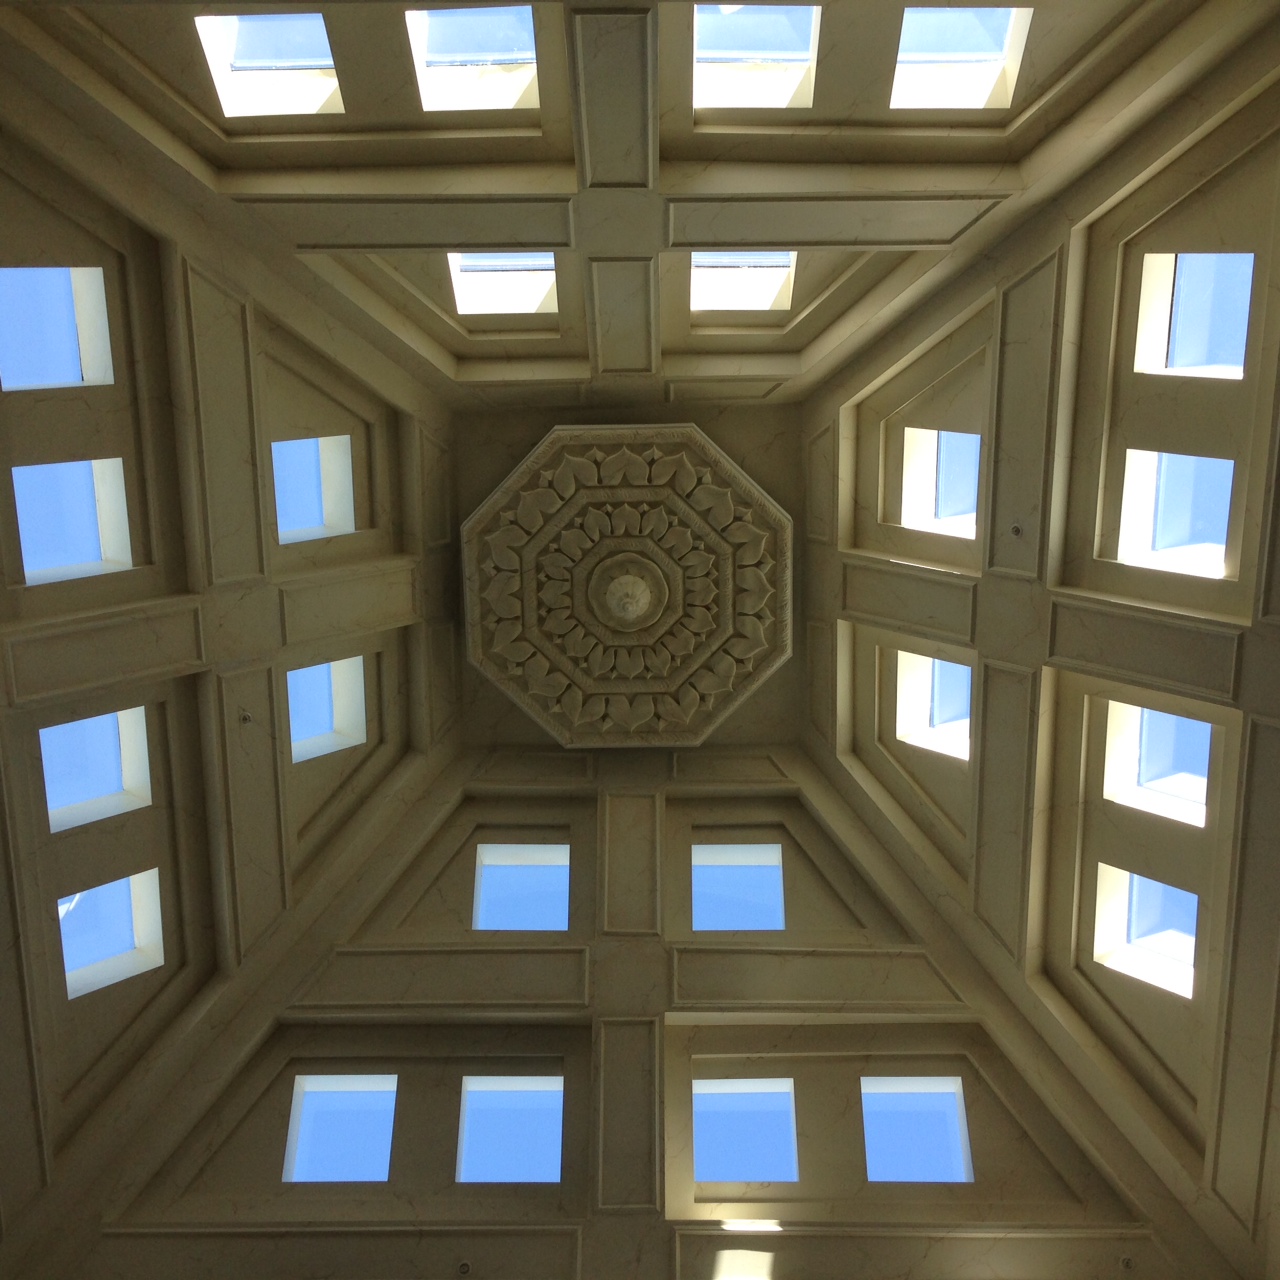 6 - A skylight dome in the entranceway